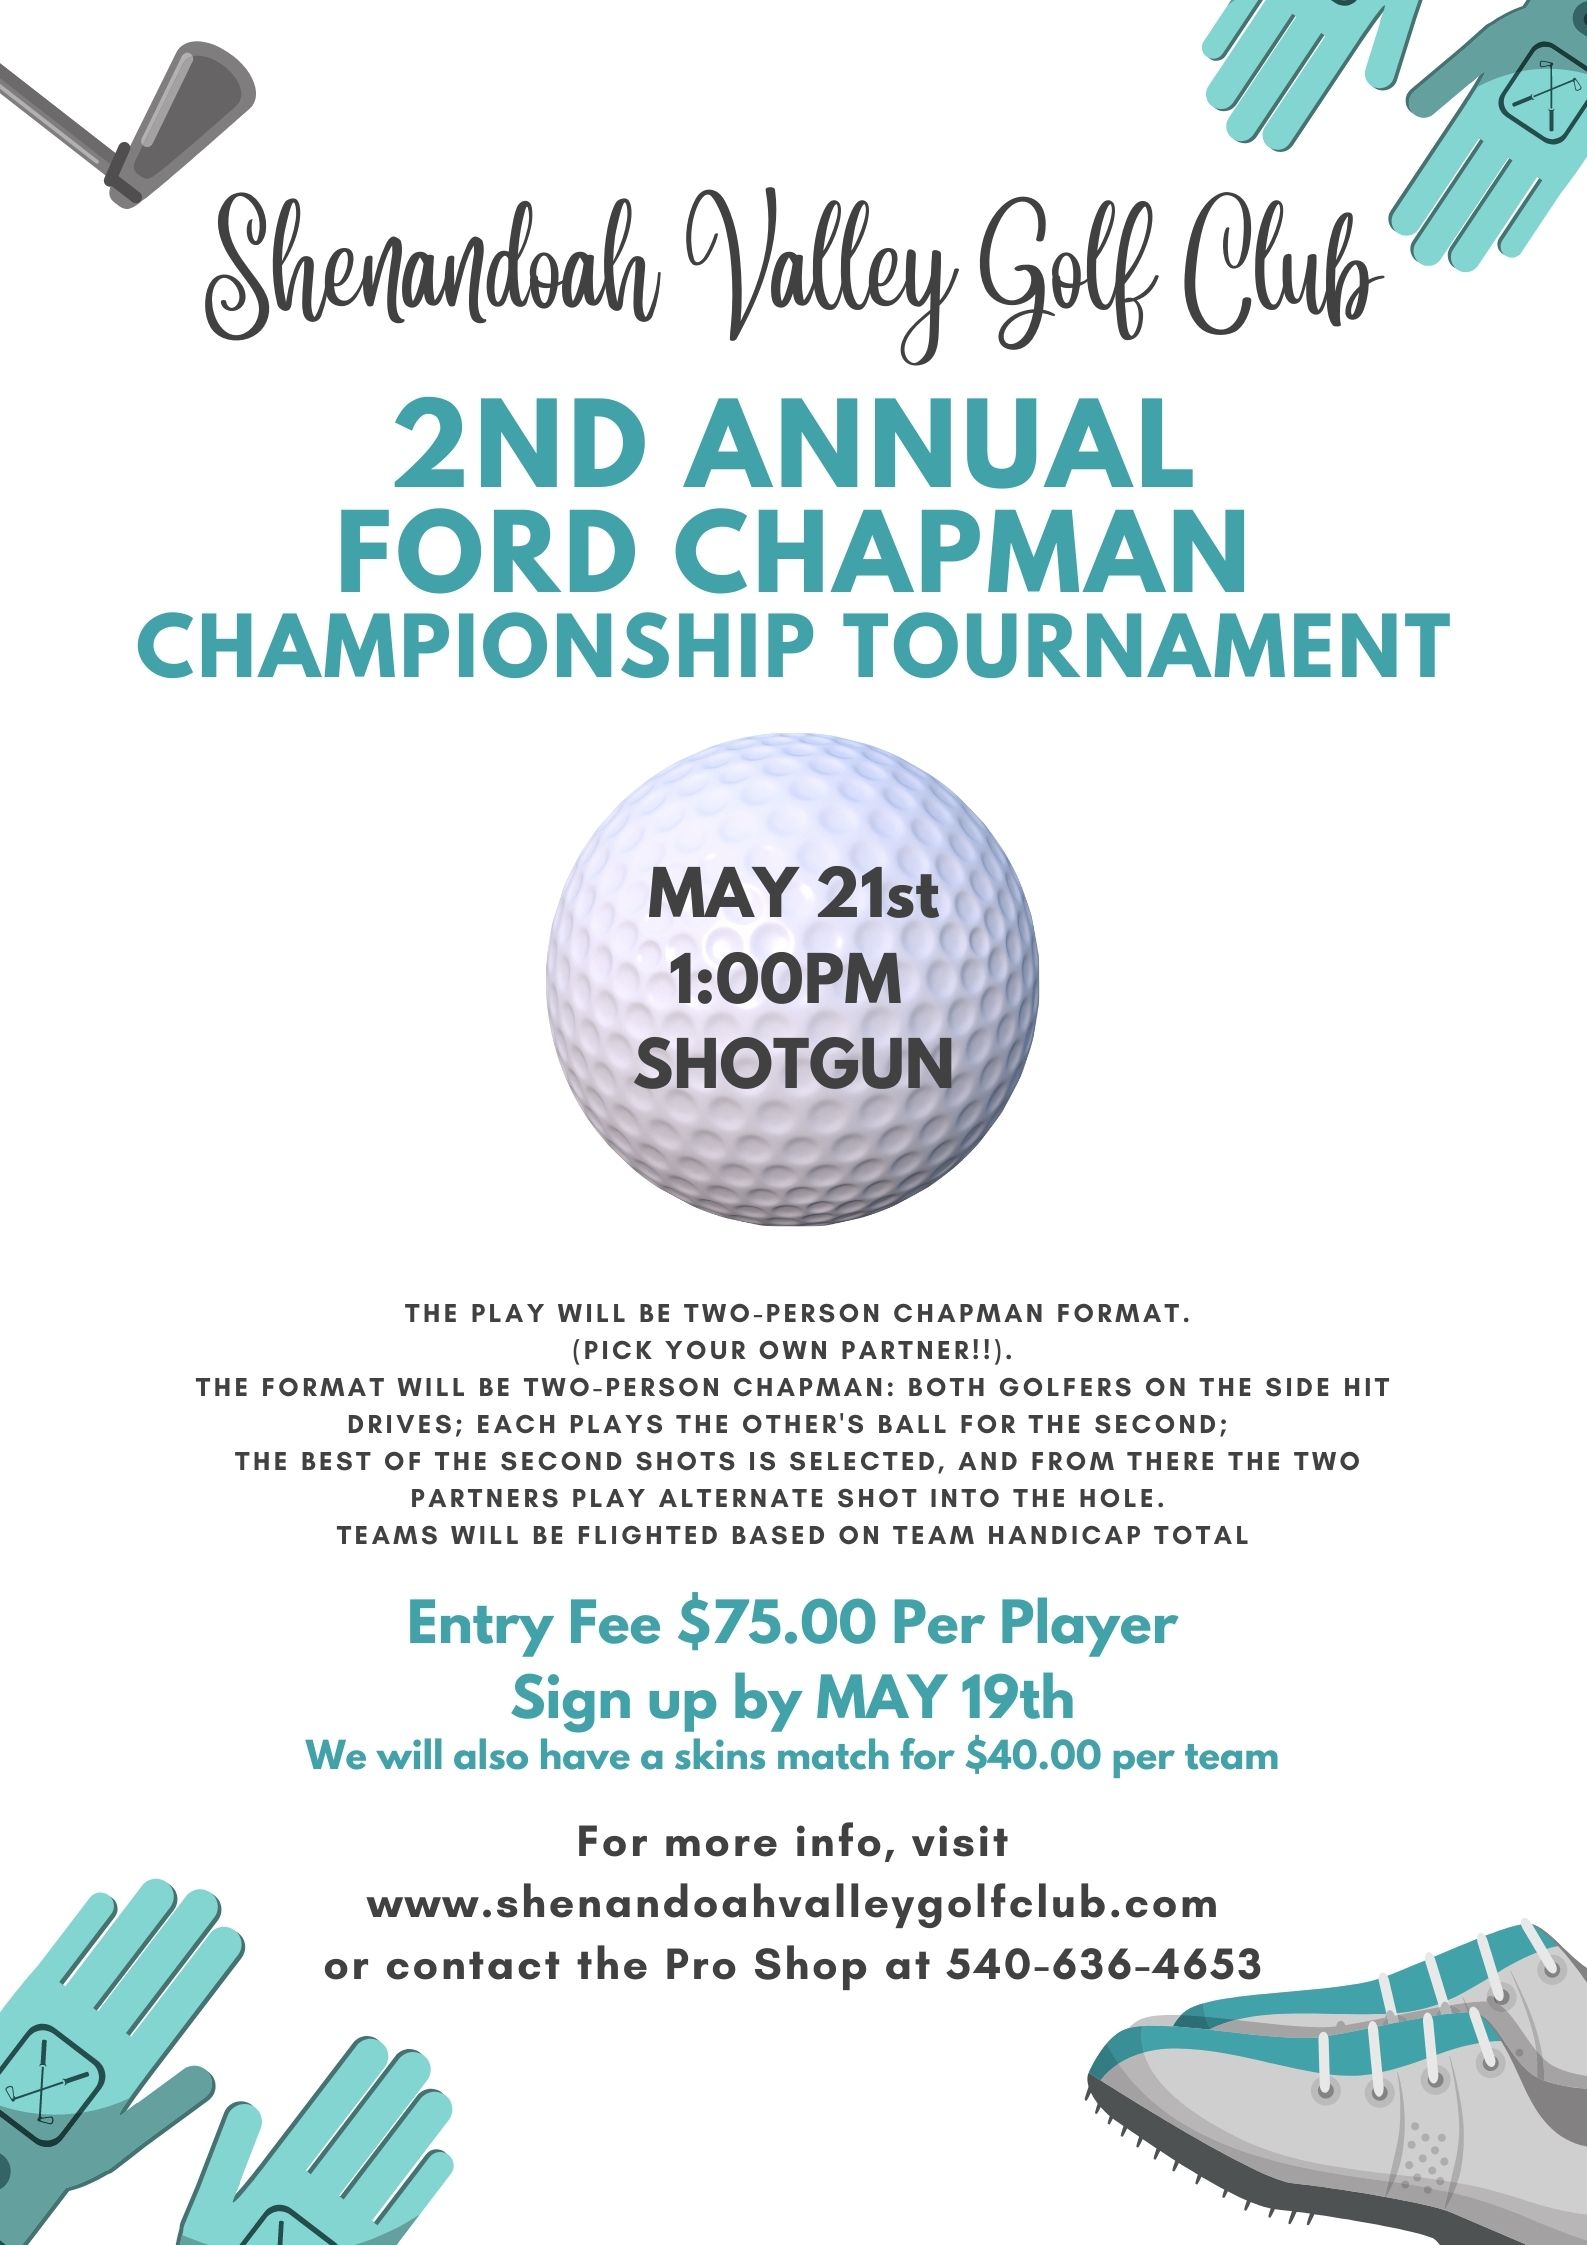 2nd Annual Harold Ford Chapman Championship Tournament